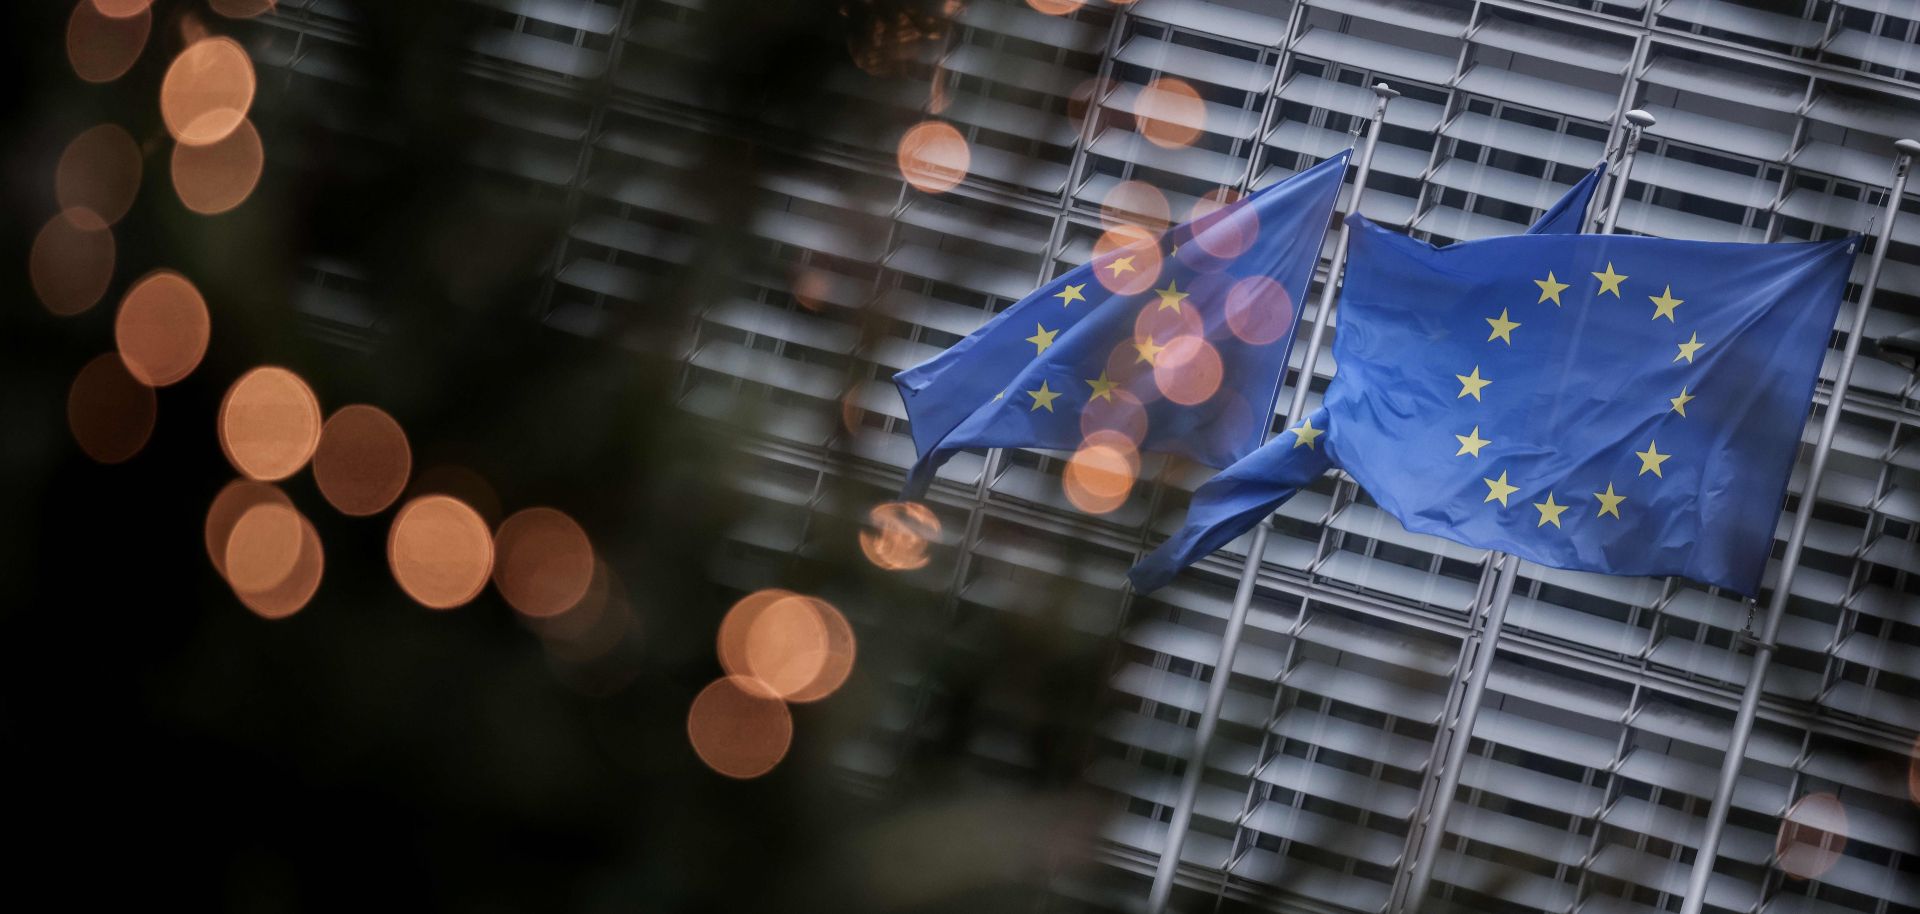 EU flags fly outside the European Commission building in Brussels on Dec. 7, 2020.